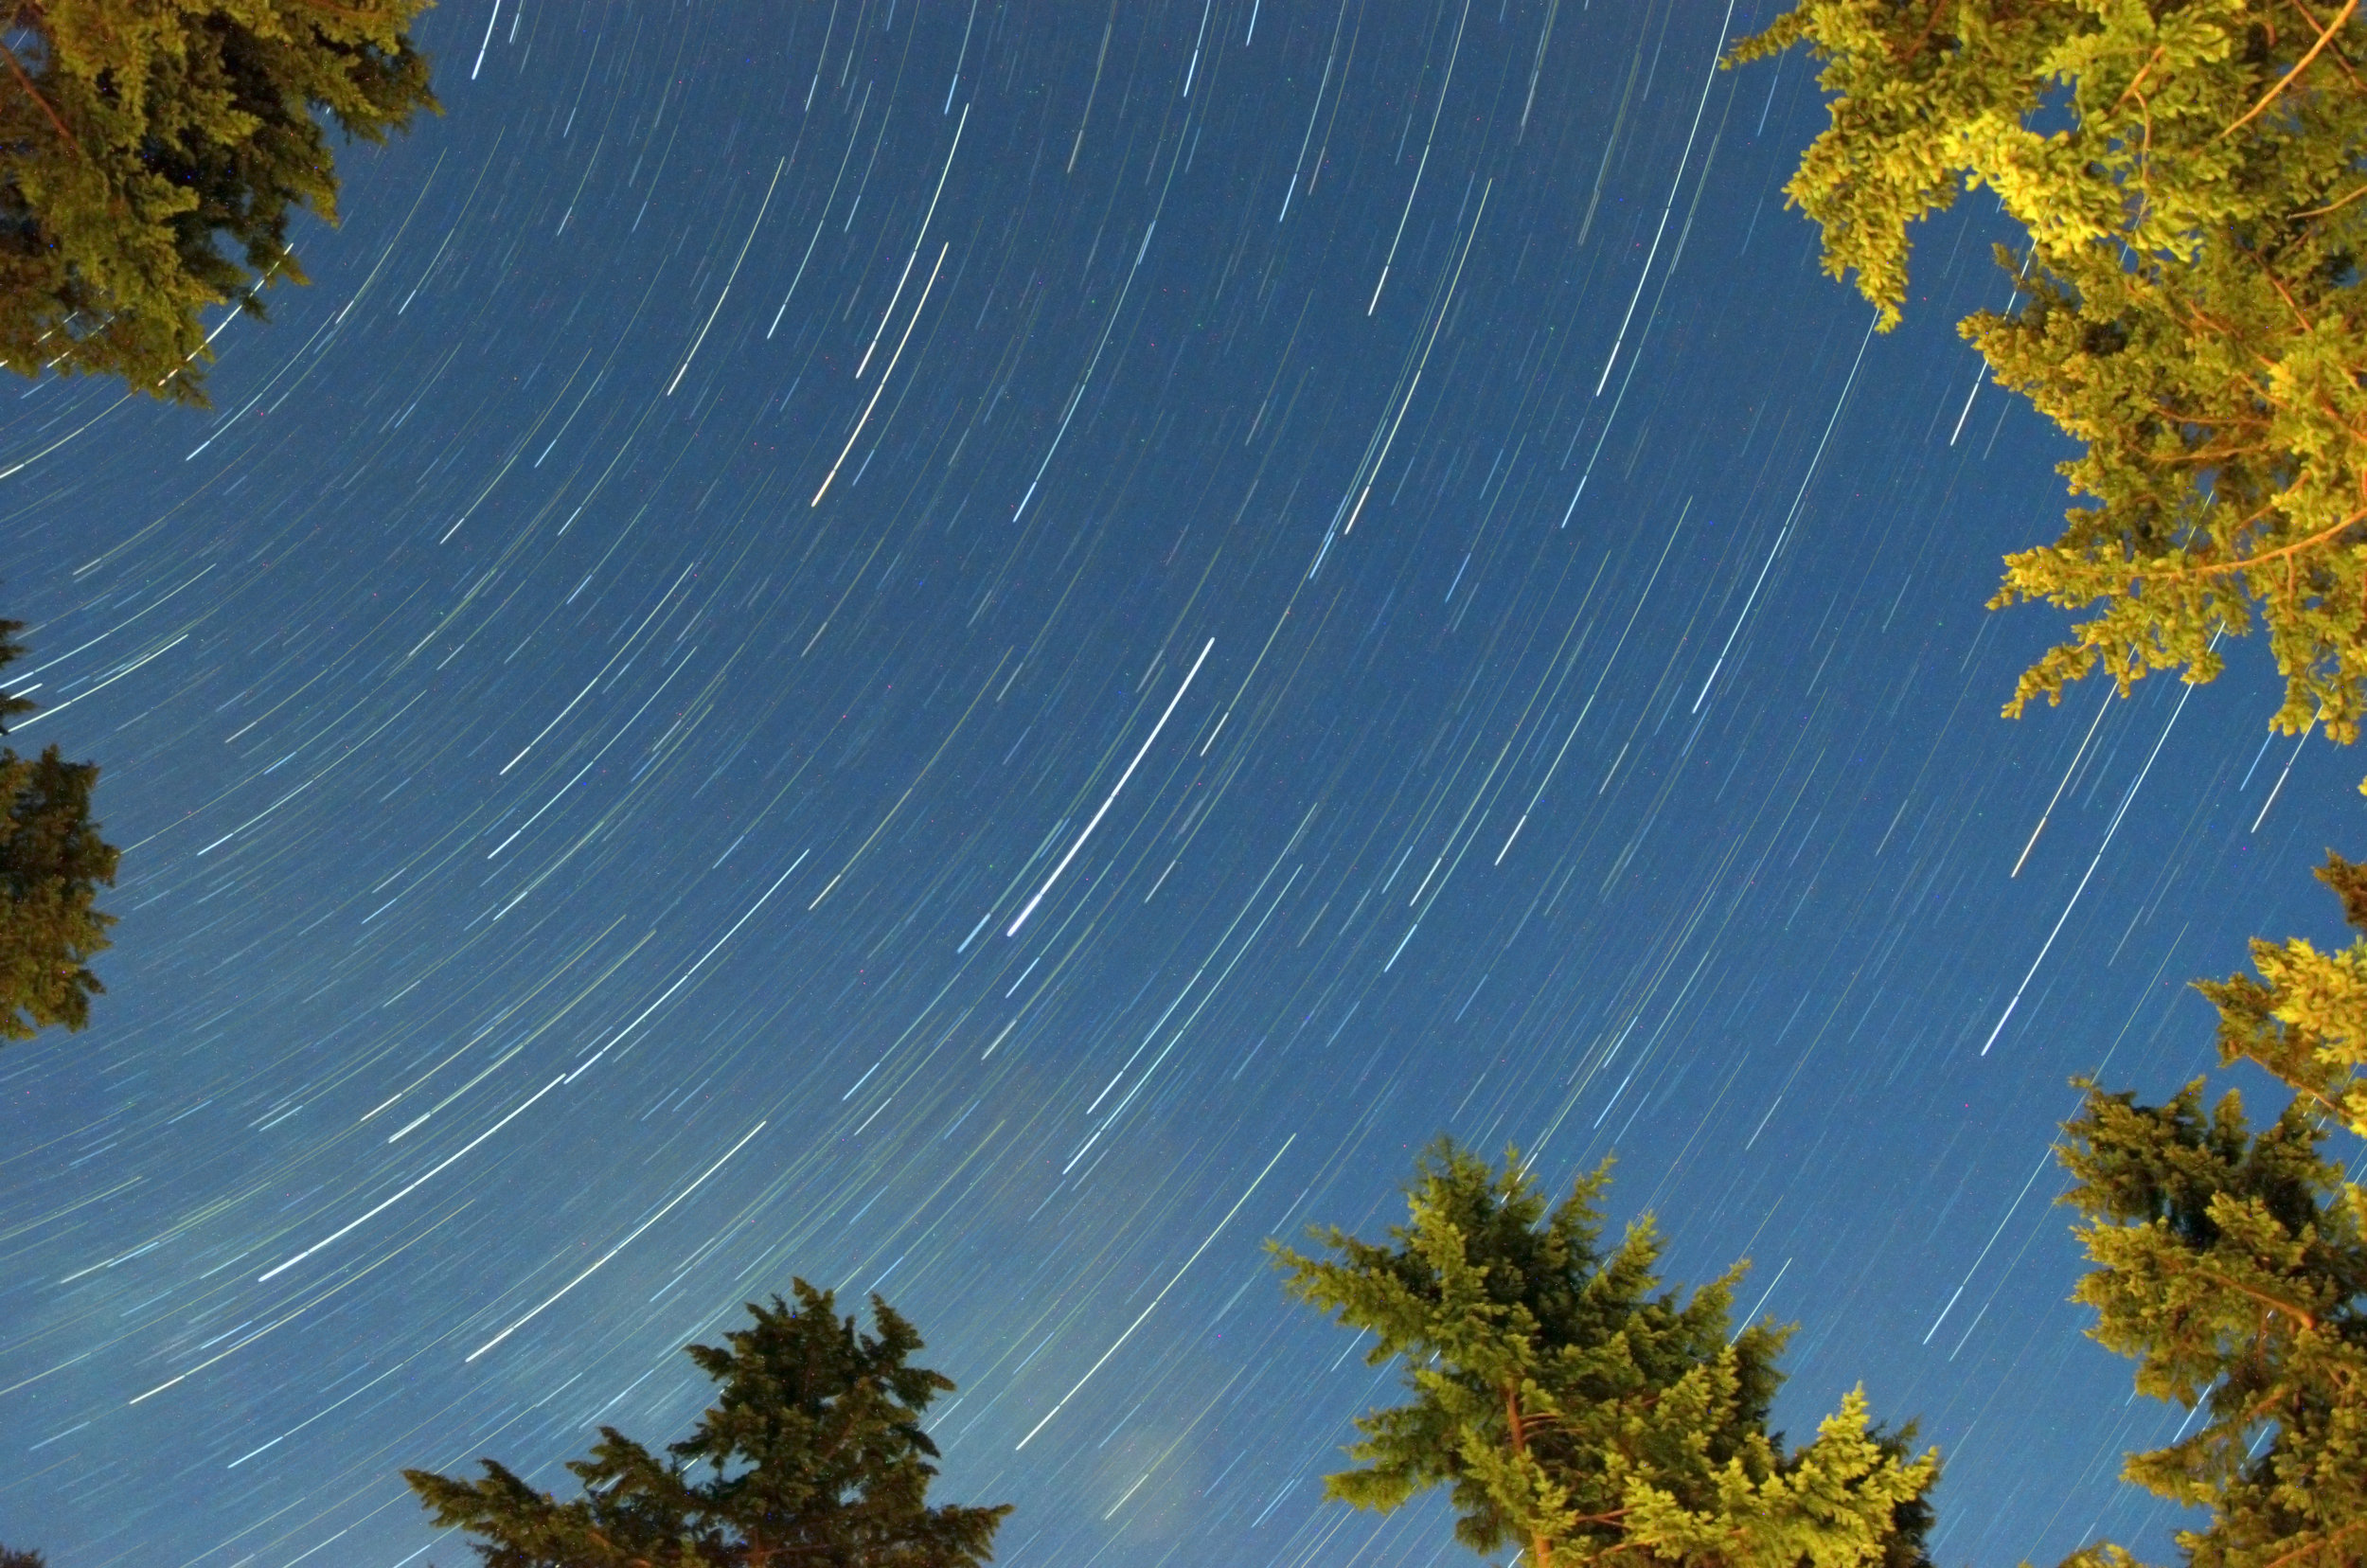 Star trails at Pender Island